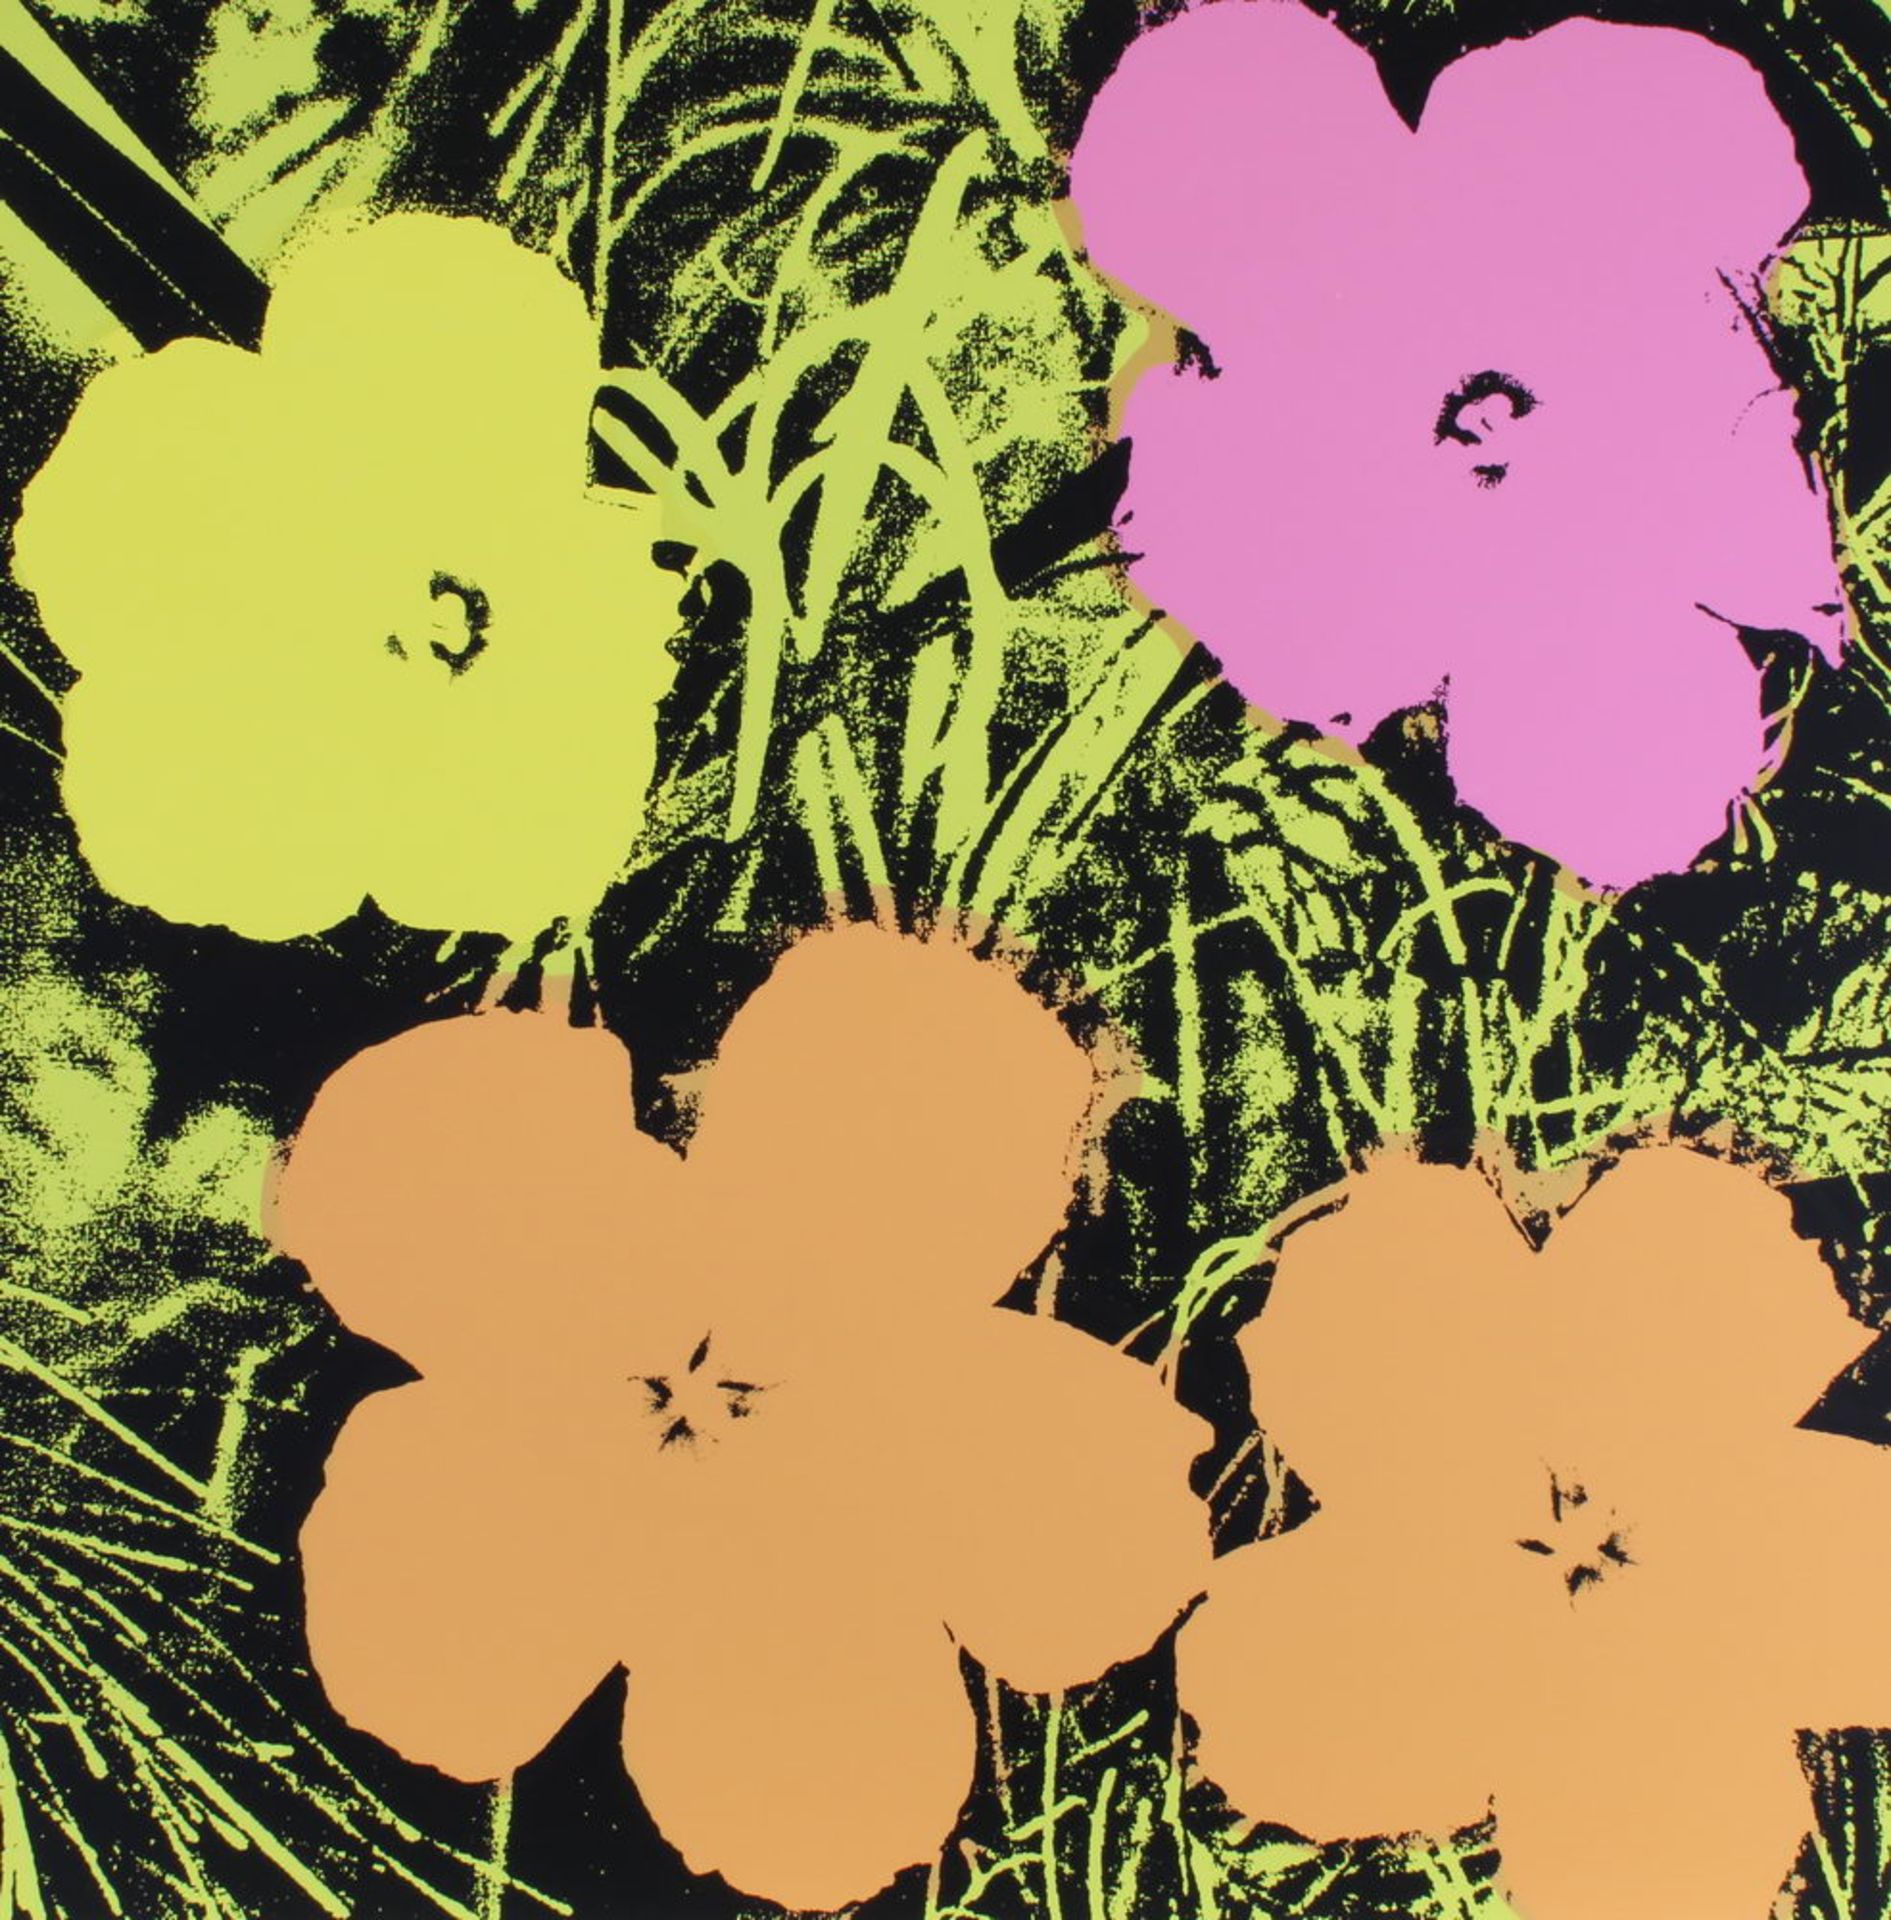 Warhol, Andy (1928 Pittsburgh - 1987 New York), 10 Farbserigrafien, "Flowers", published by Sunday - Image 3 of 10